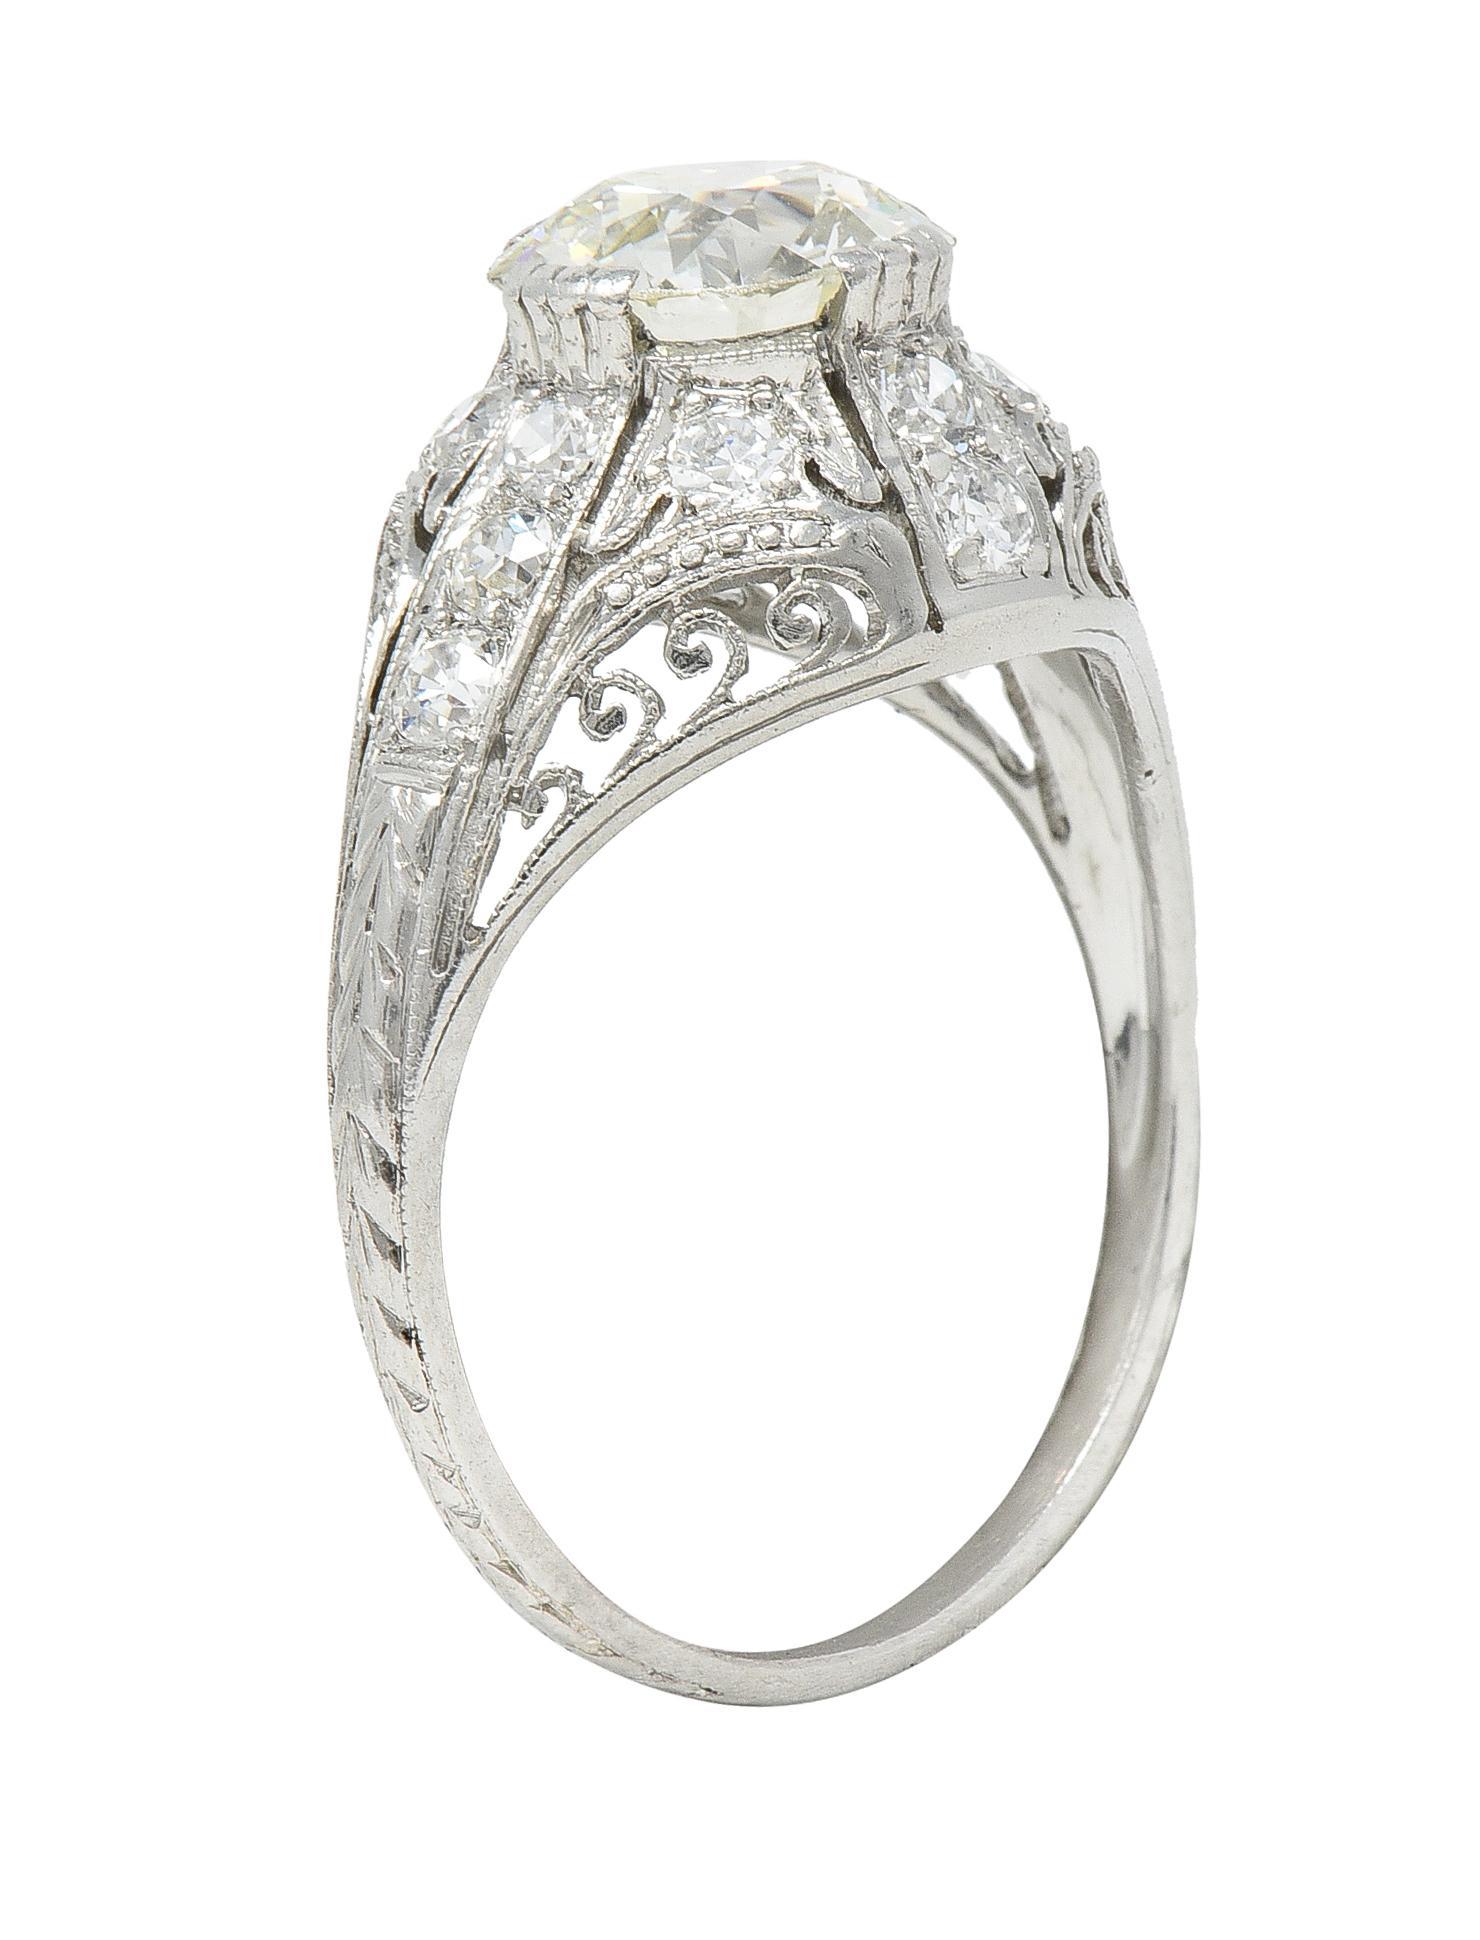 Centering an old European cut diamond weighing approximately 1.31 carats - O color with VS2 clarity 
Set with grooved compass style prongs with a bombay form surround
Featuring pierced scroll motif filigree and miligrain detailing 
With bead set